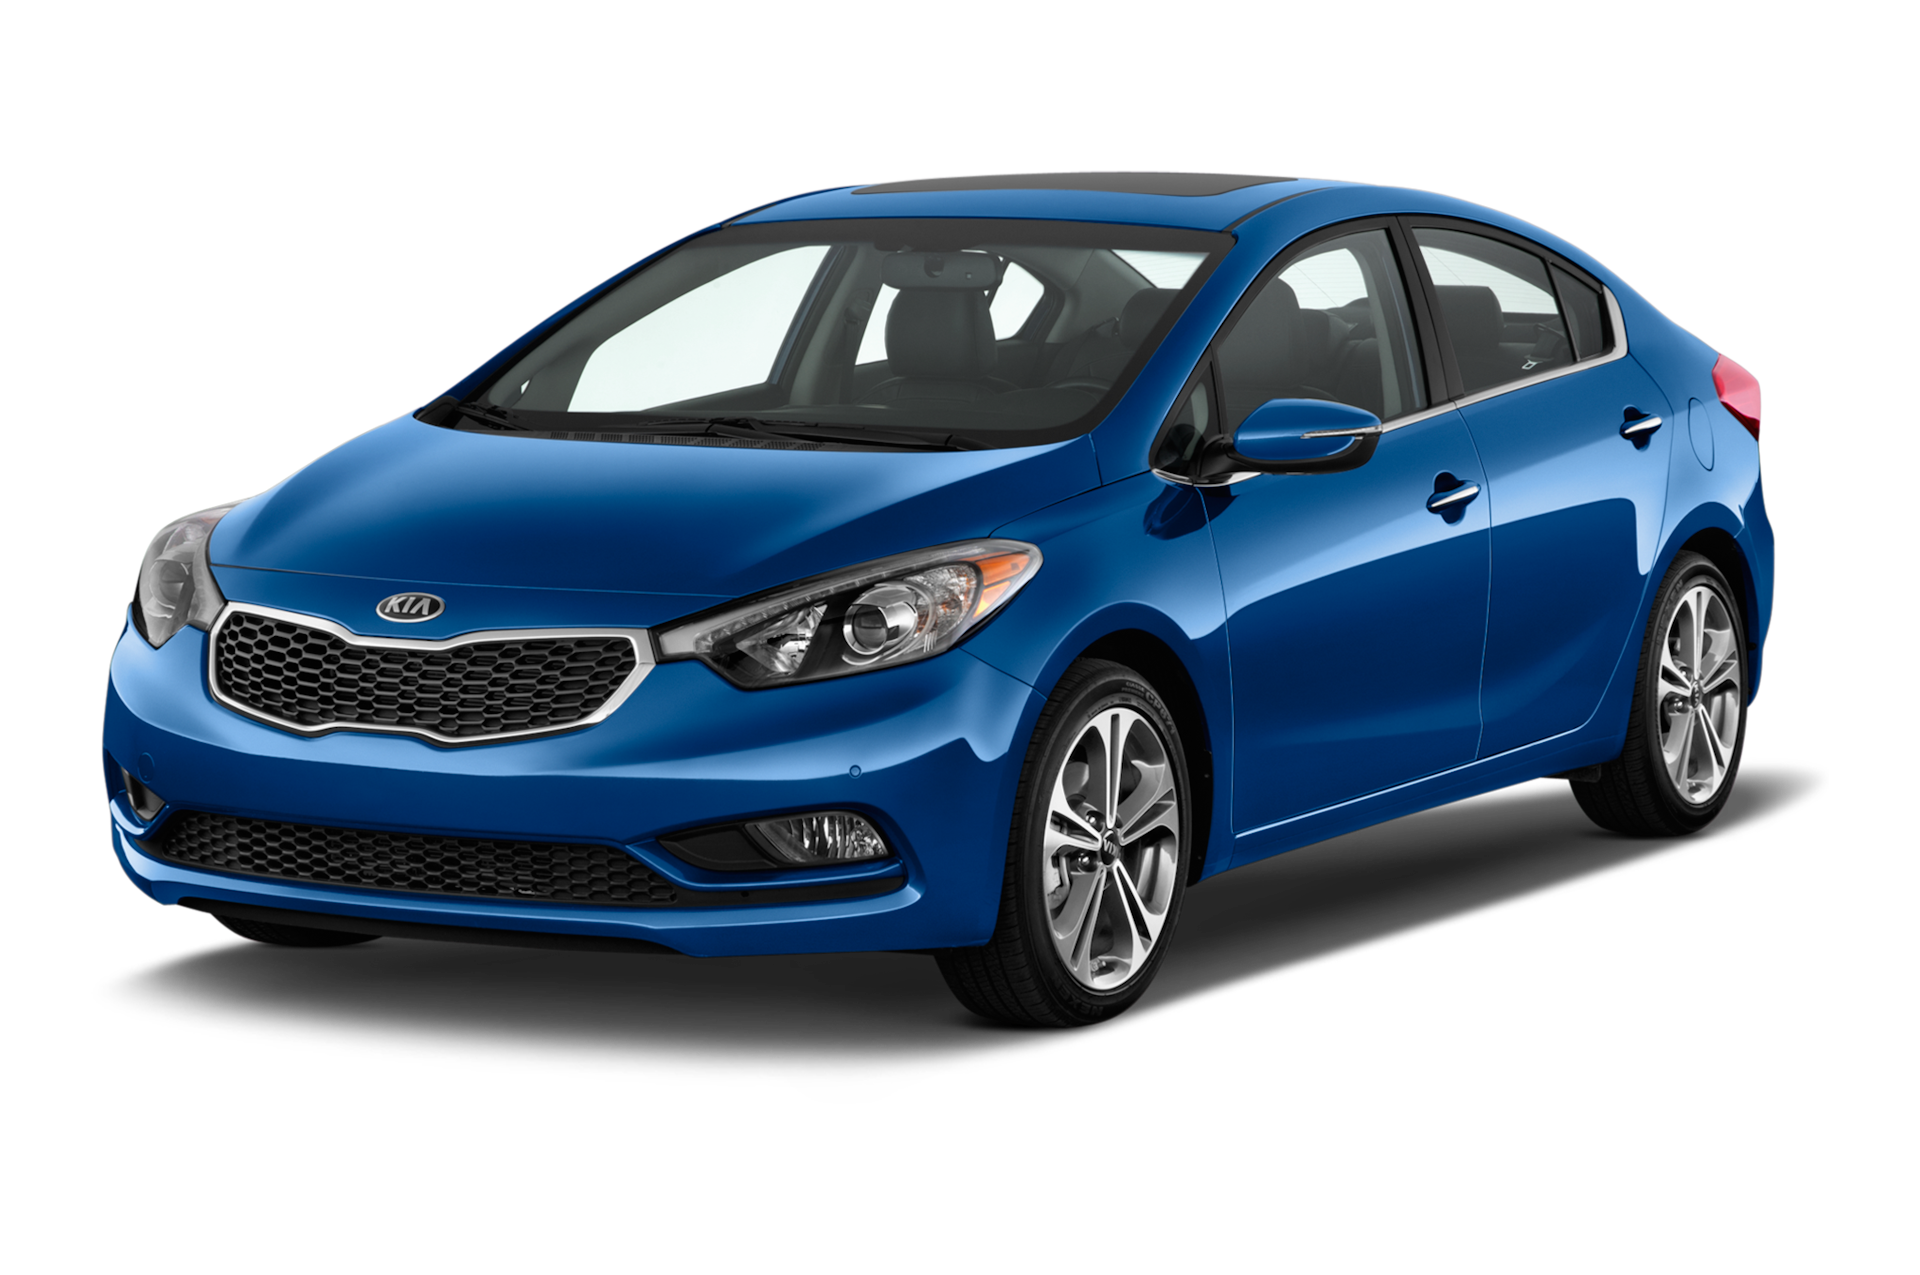 2015 Kia Forte Prices, Reviews, and Photos - MotorTrend